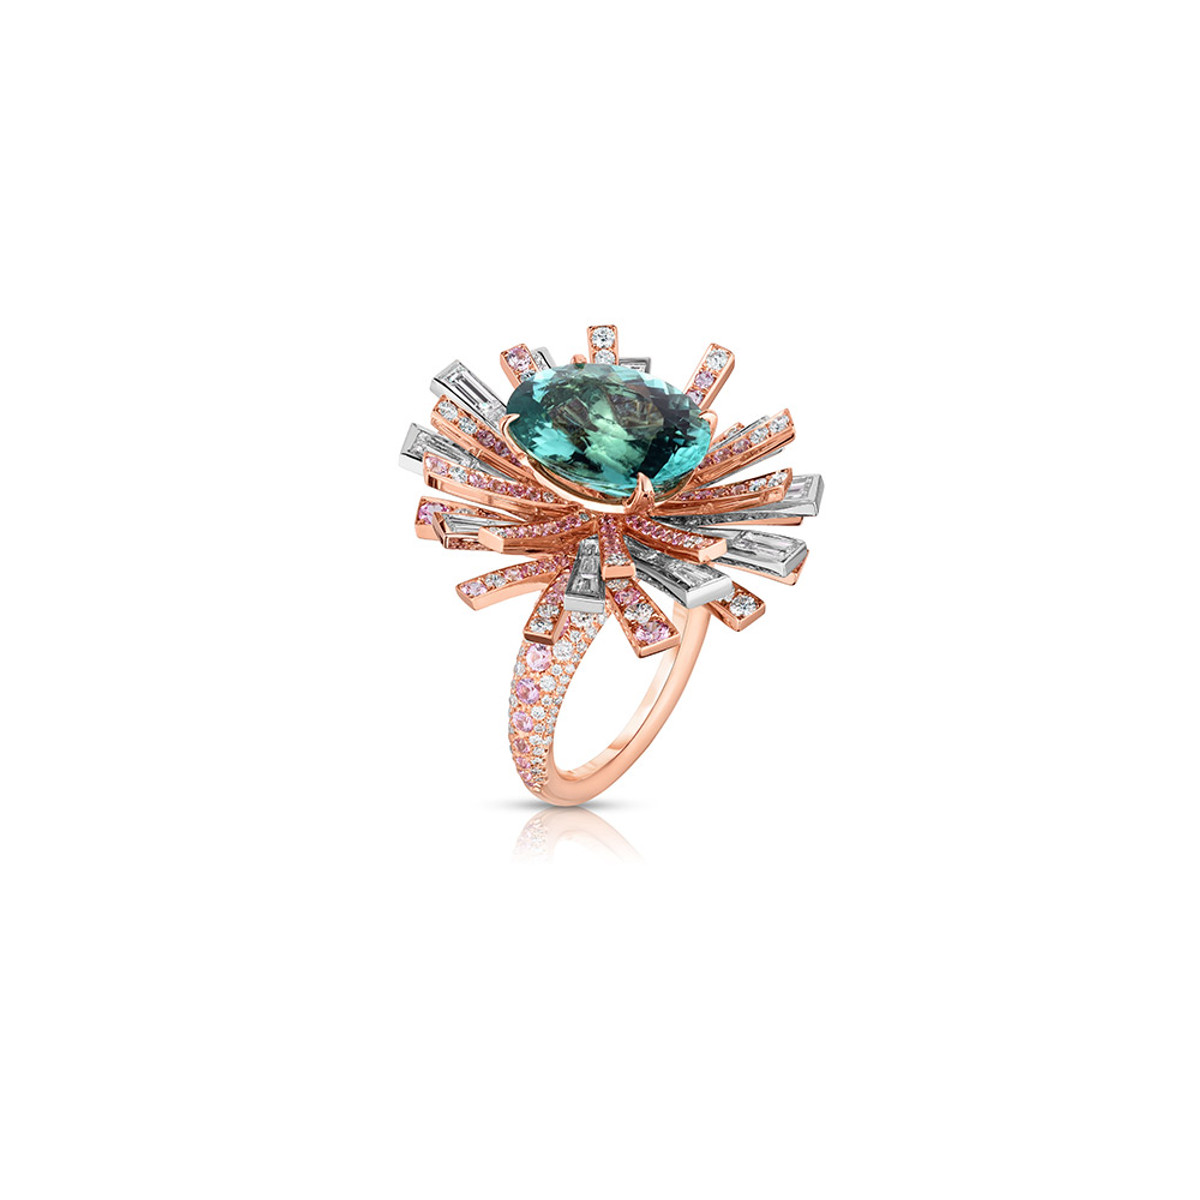 Hyde Park Collection 18K Rose Gold and Platinum Tourmaline and Sapphire Ring Product Image